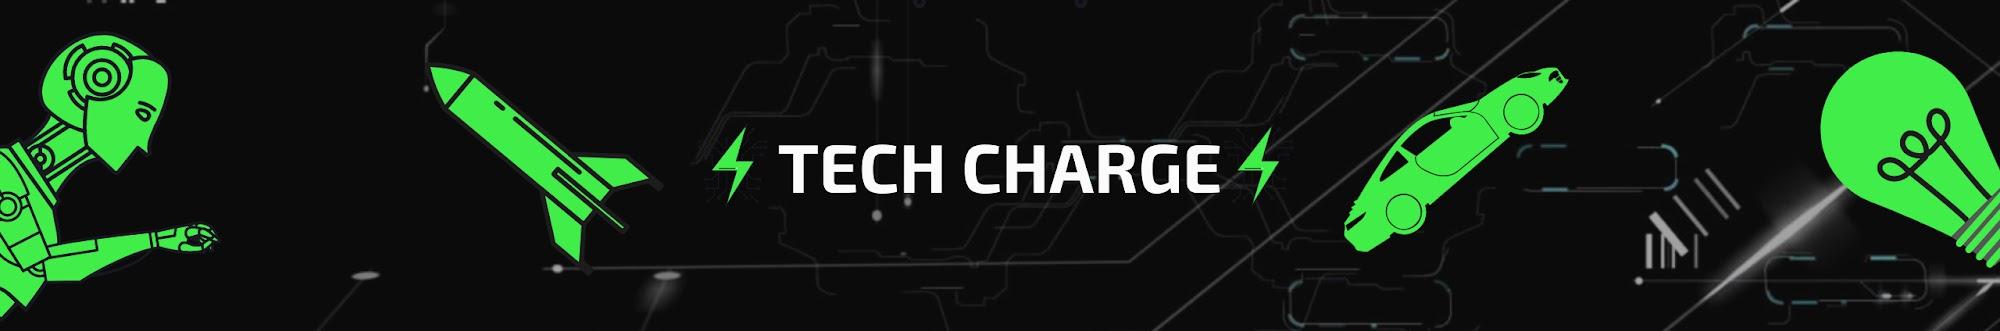 Tech Charge